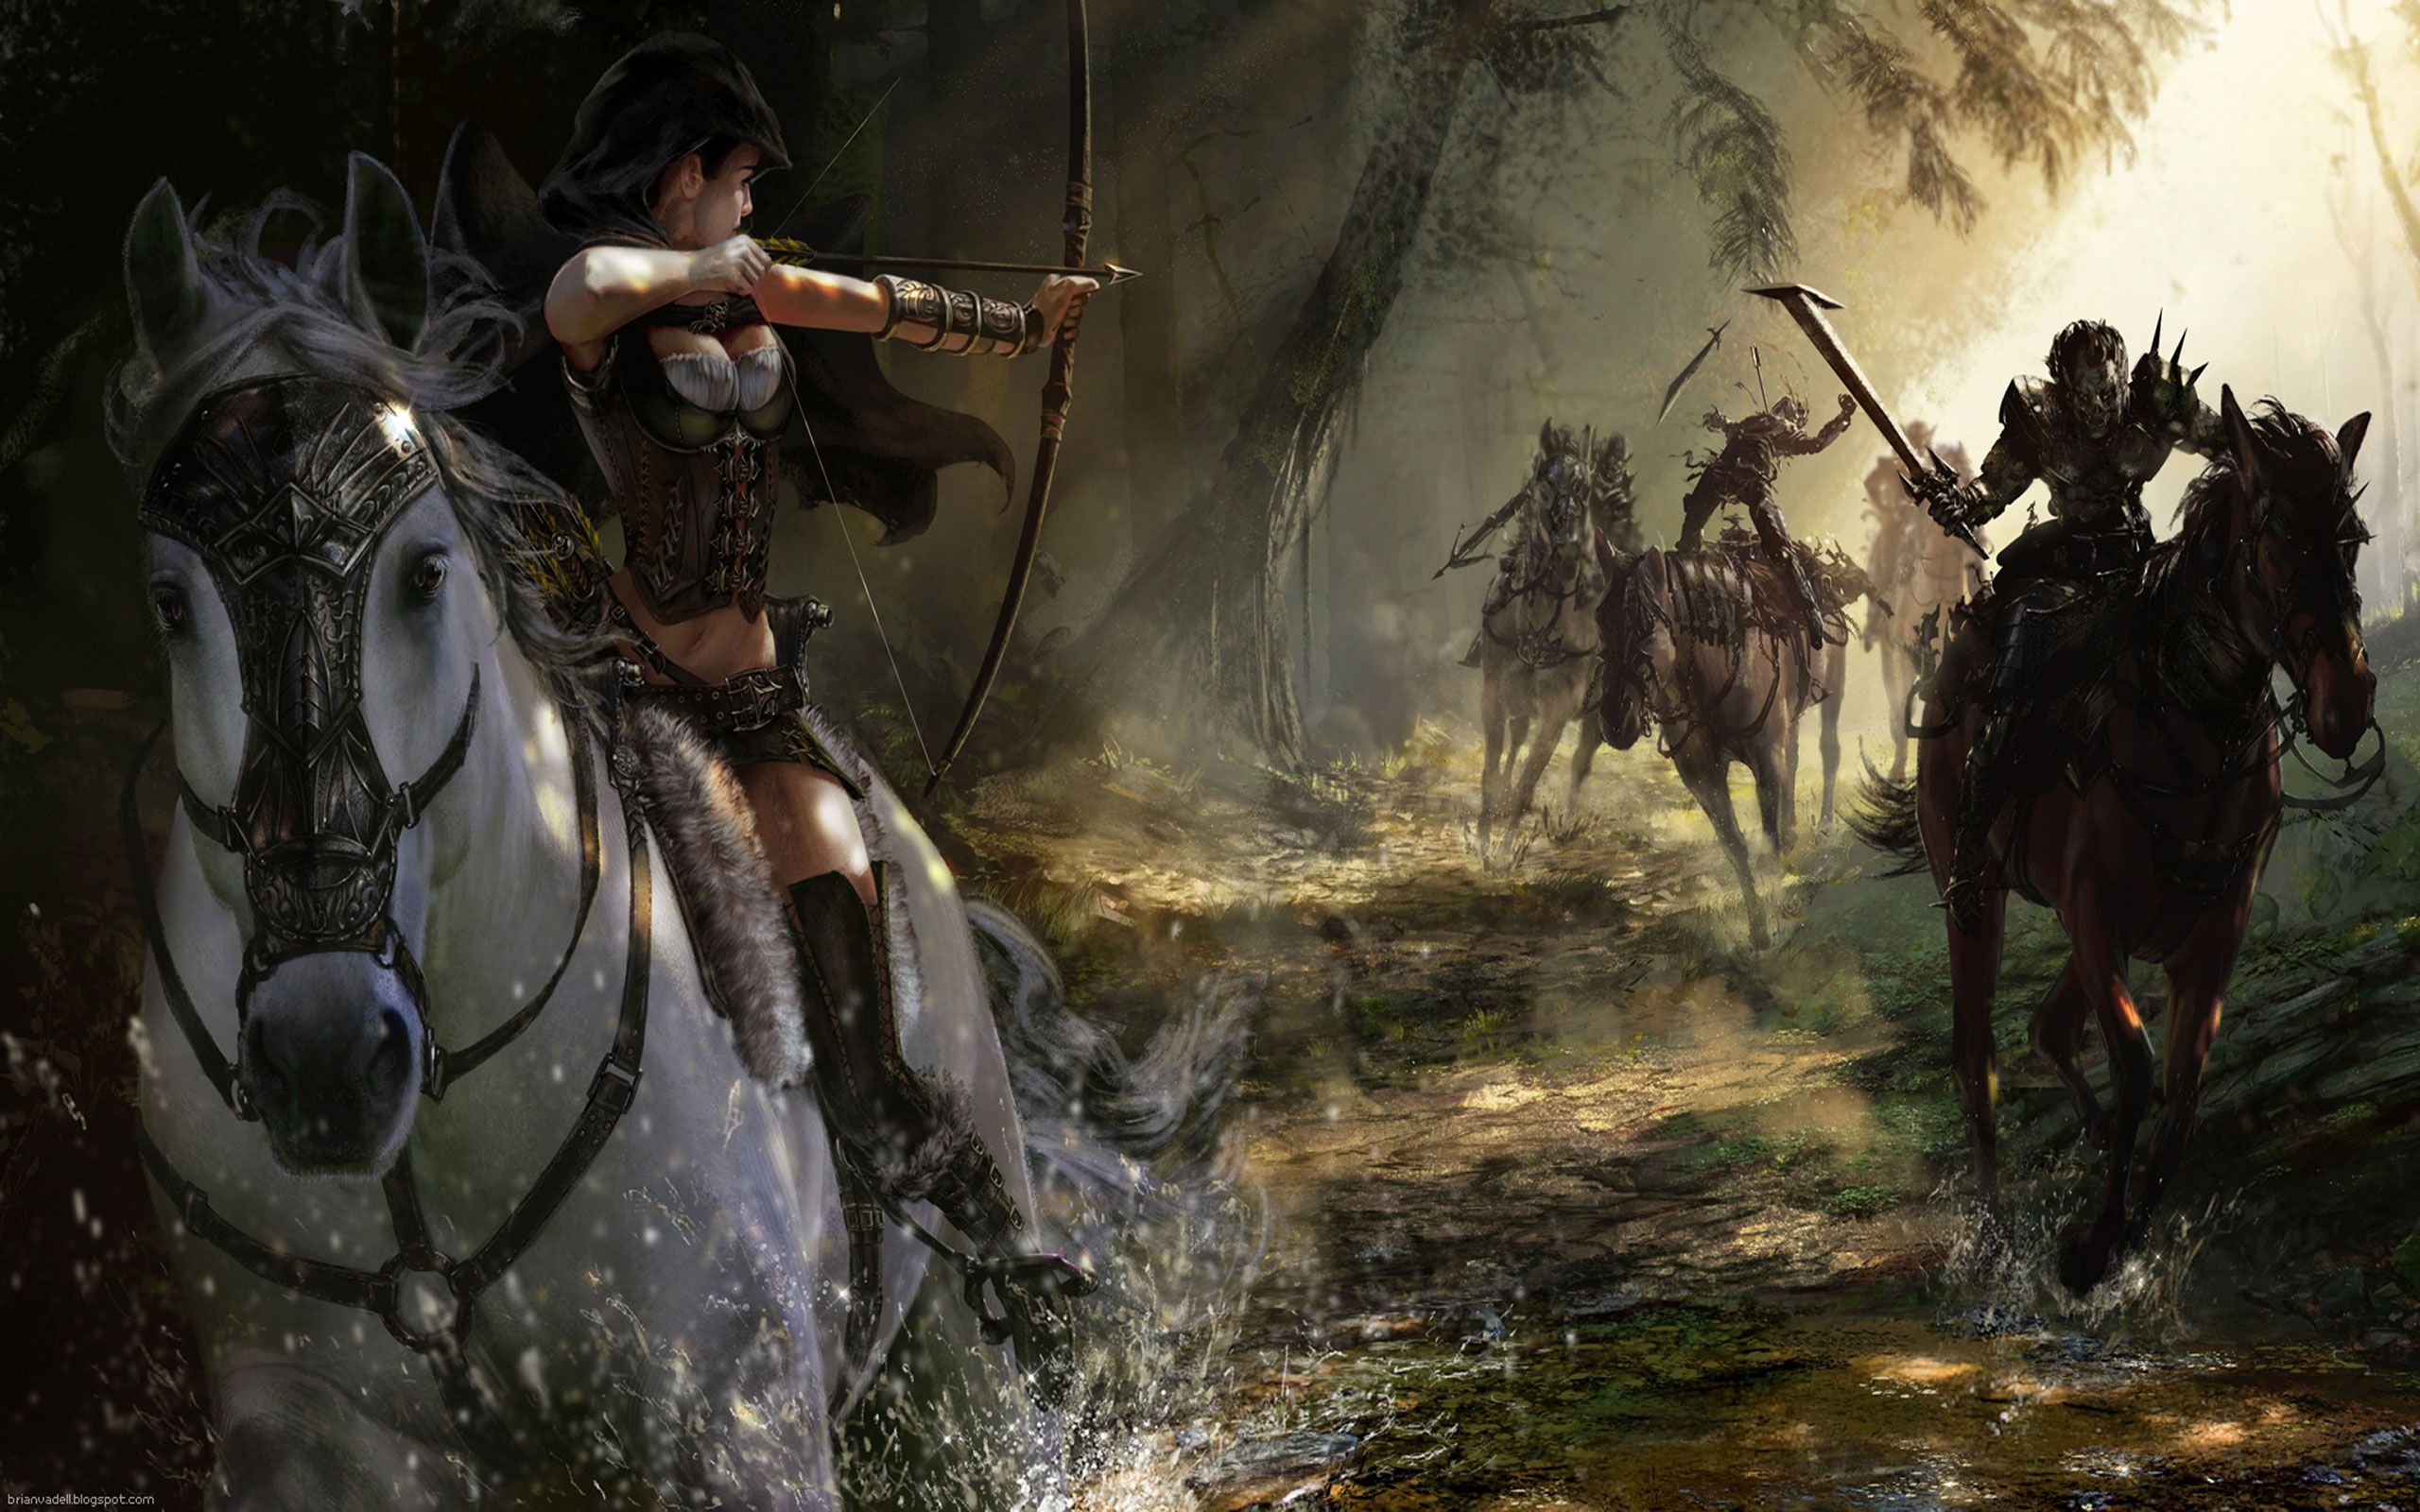 Best 54+ Archer Backgrounds on HipWallpapers.